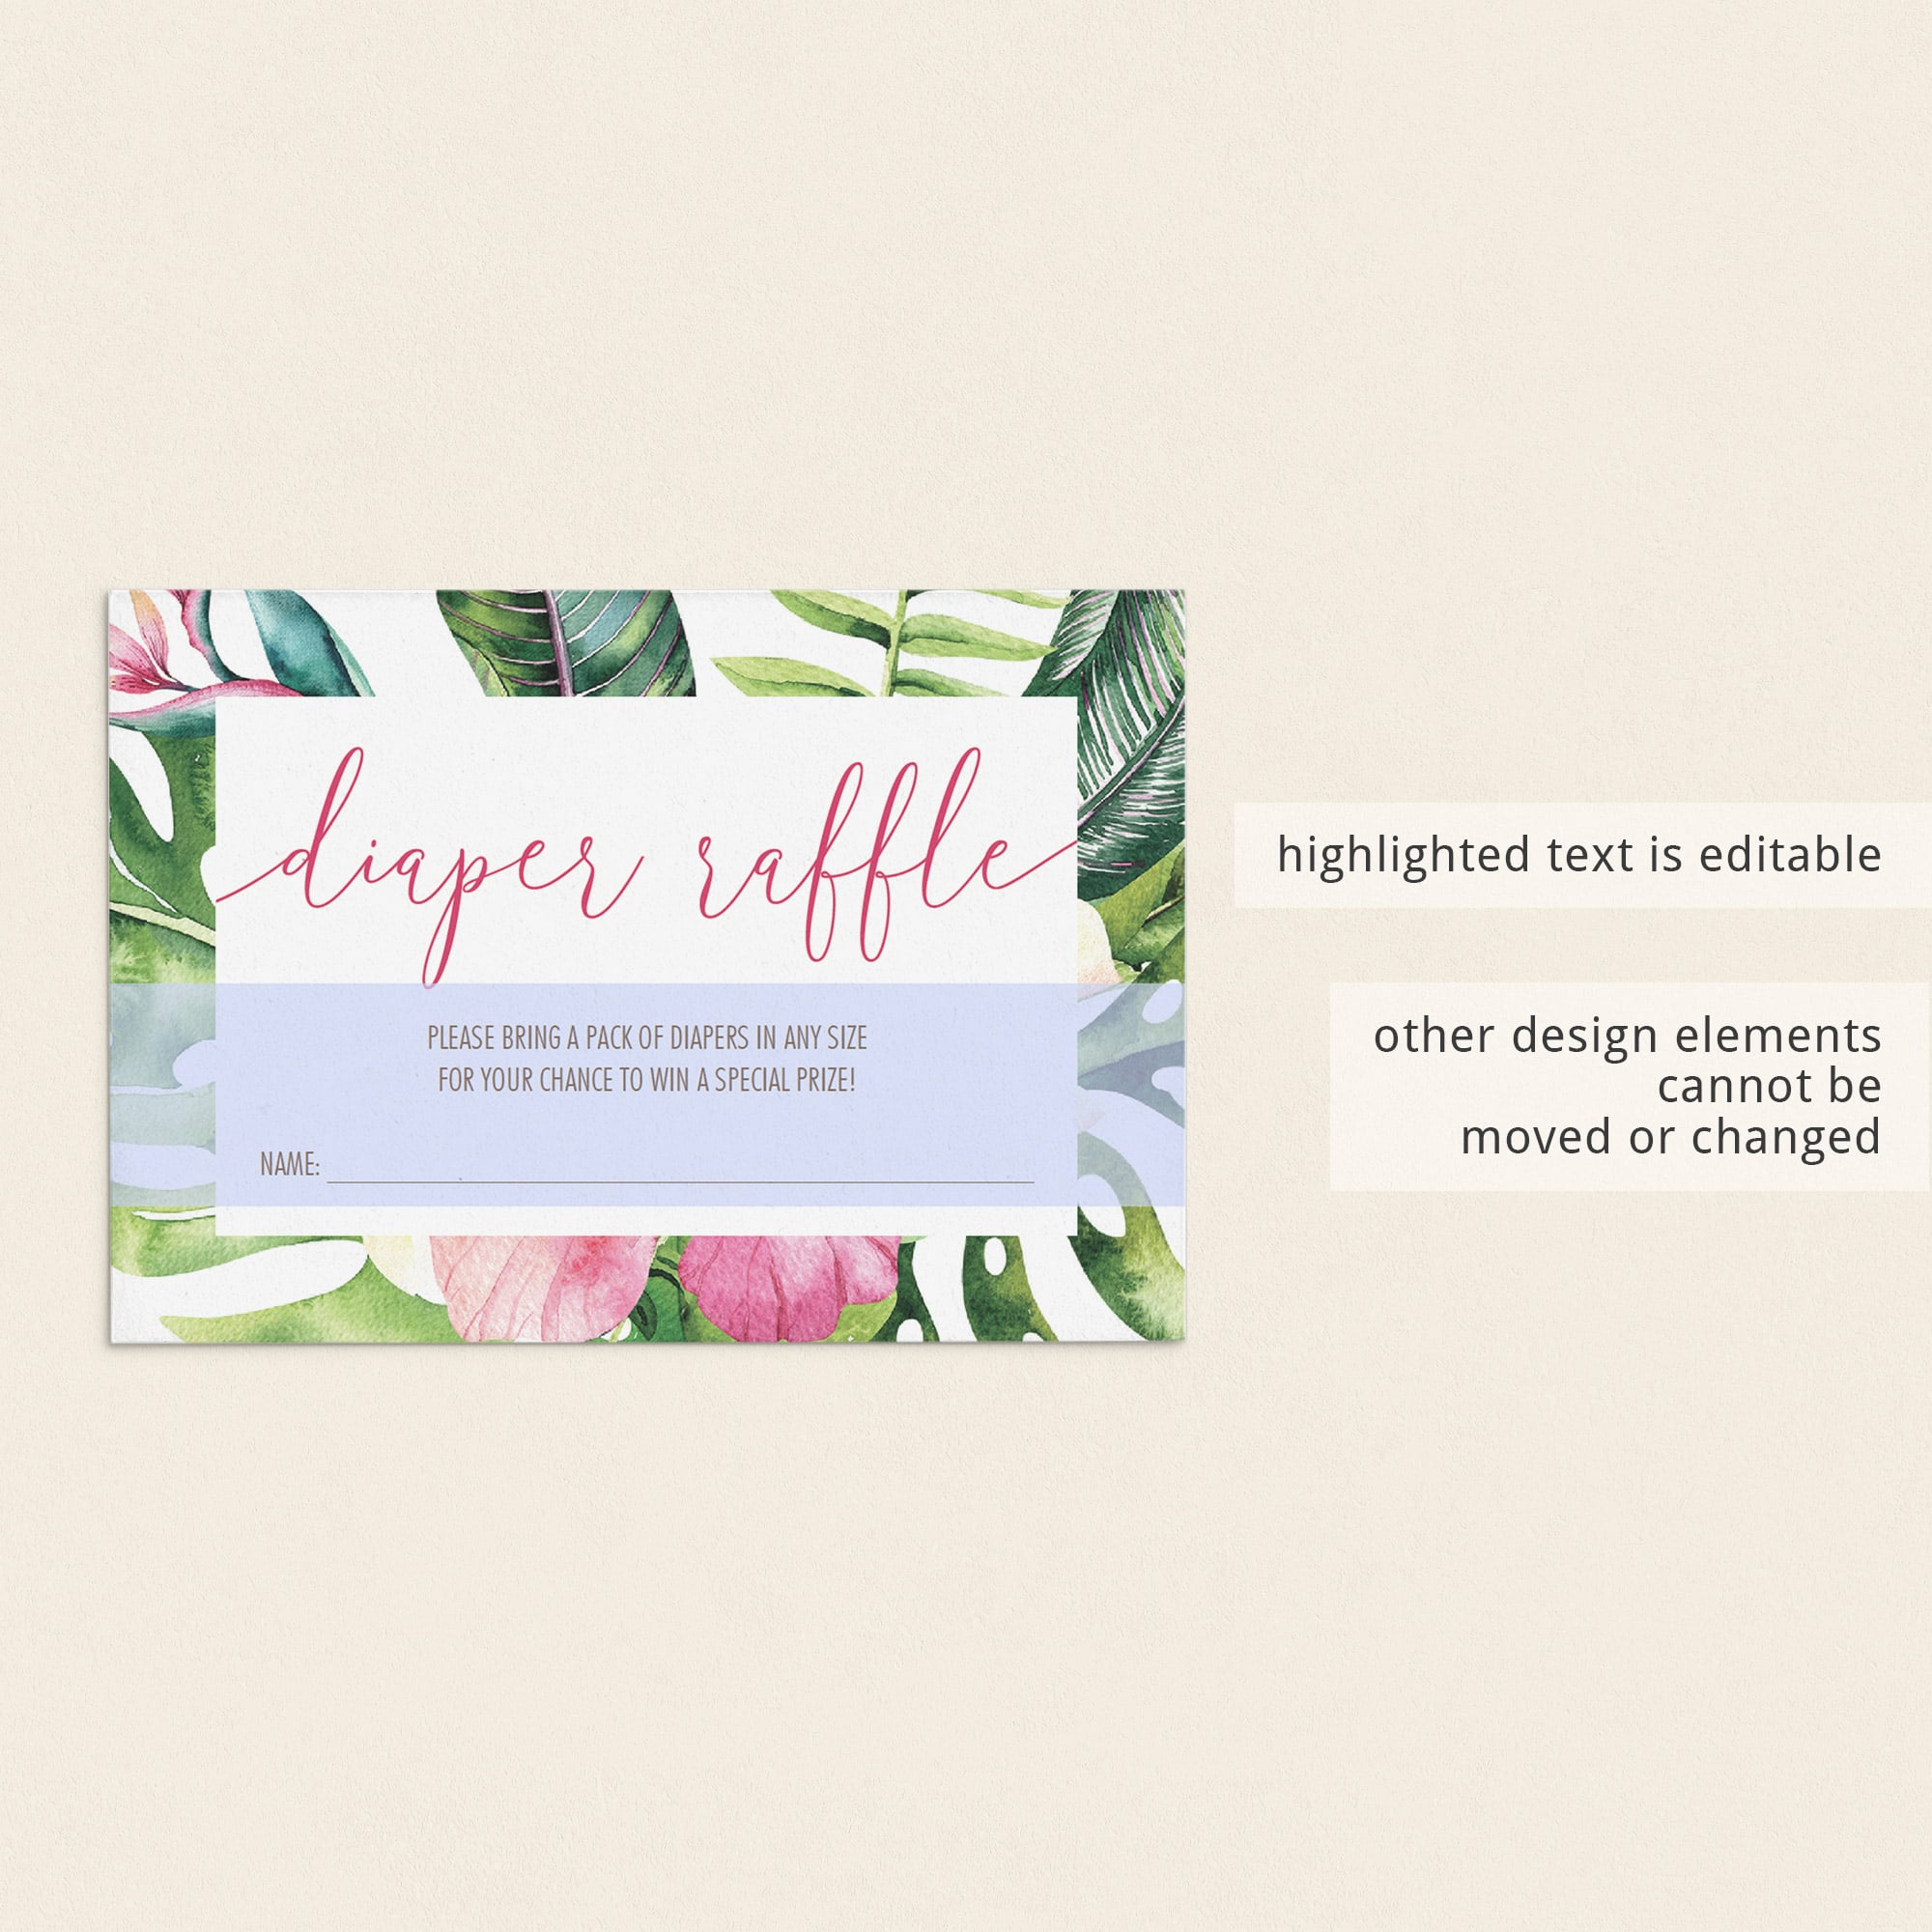 Botanical Diaper Raffle Ticket for Baby Shower by LittleSizzle